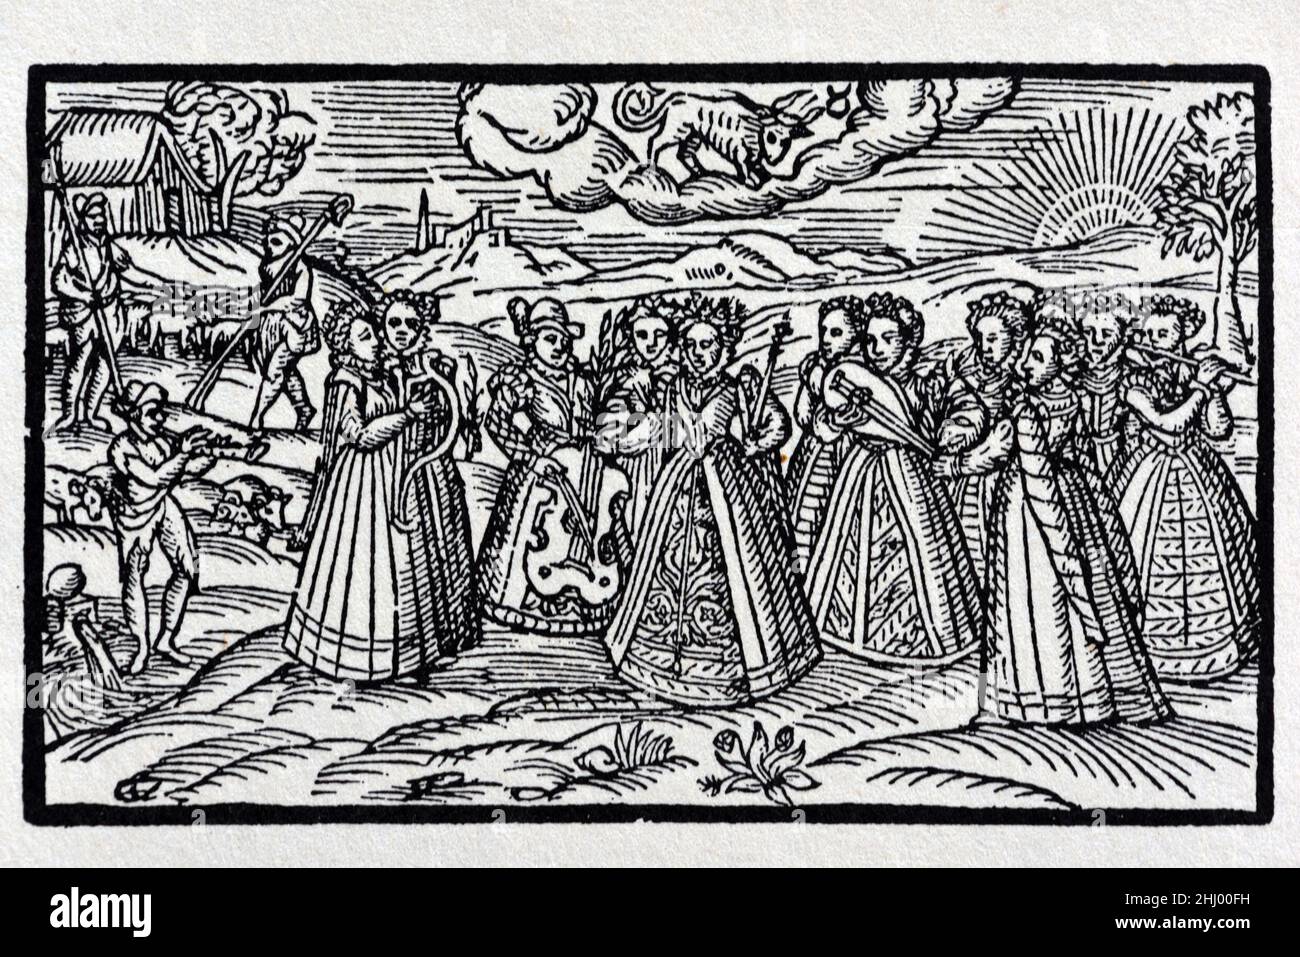 Woodcut from The Faerie Queene, by Edmund Spenser, showing Queen Elizabeth I of England with a Group of Female Musicians. 1590 Vintage Woodcut Print, Engraving or Illustration Stock Photo